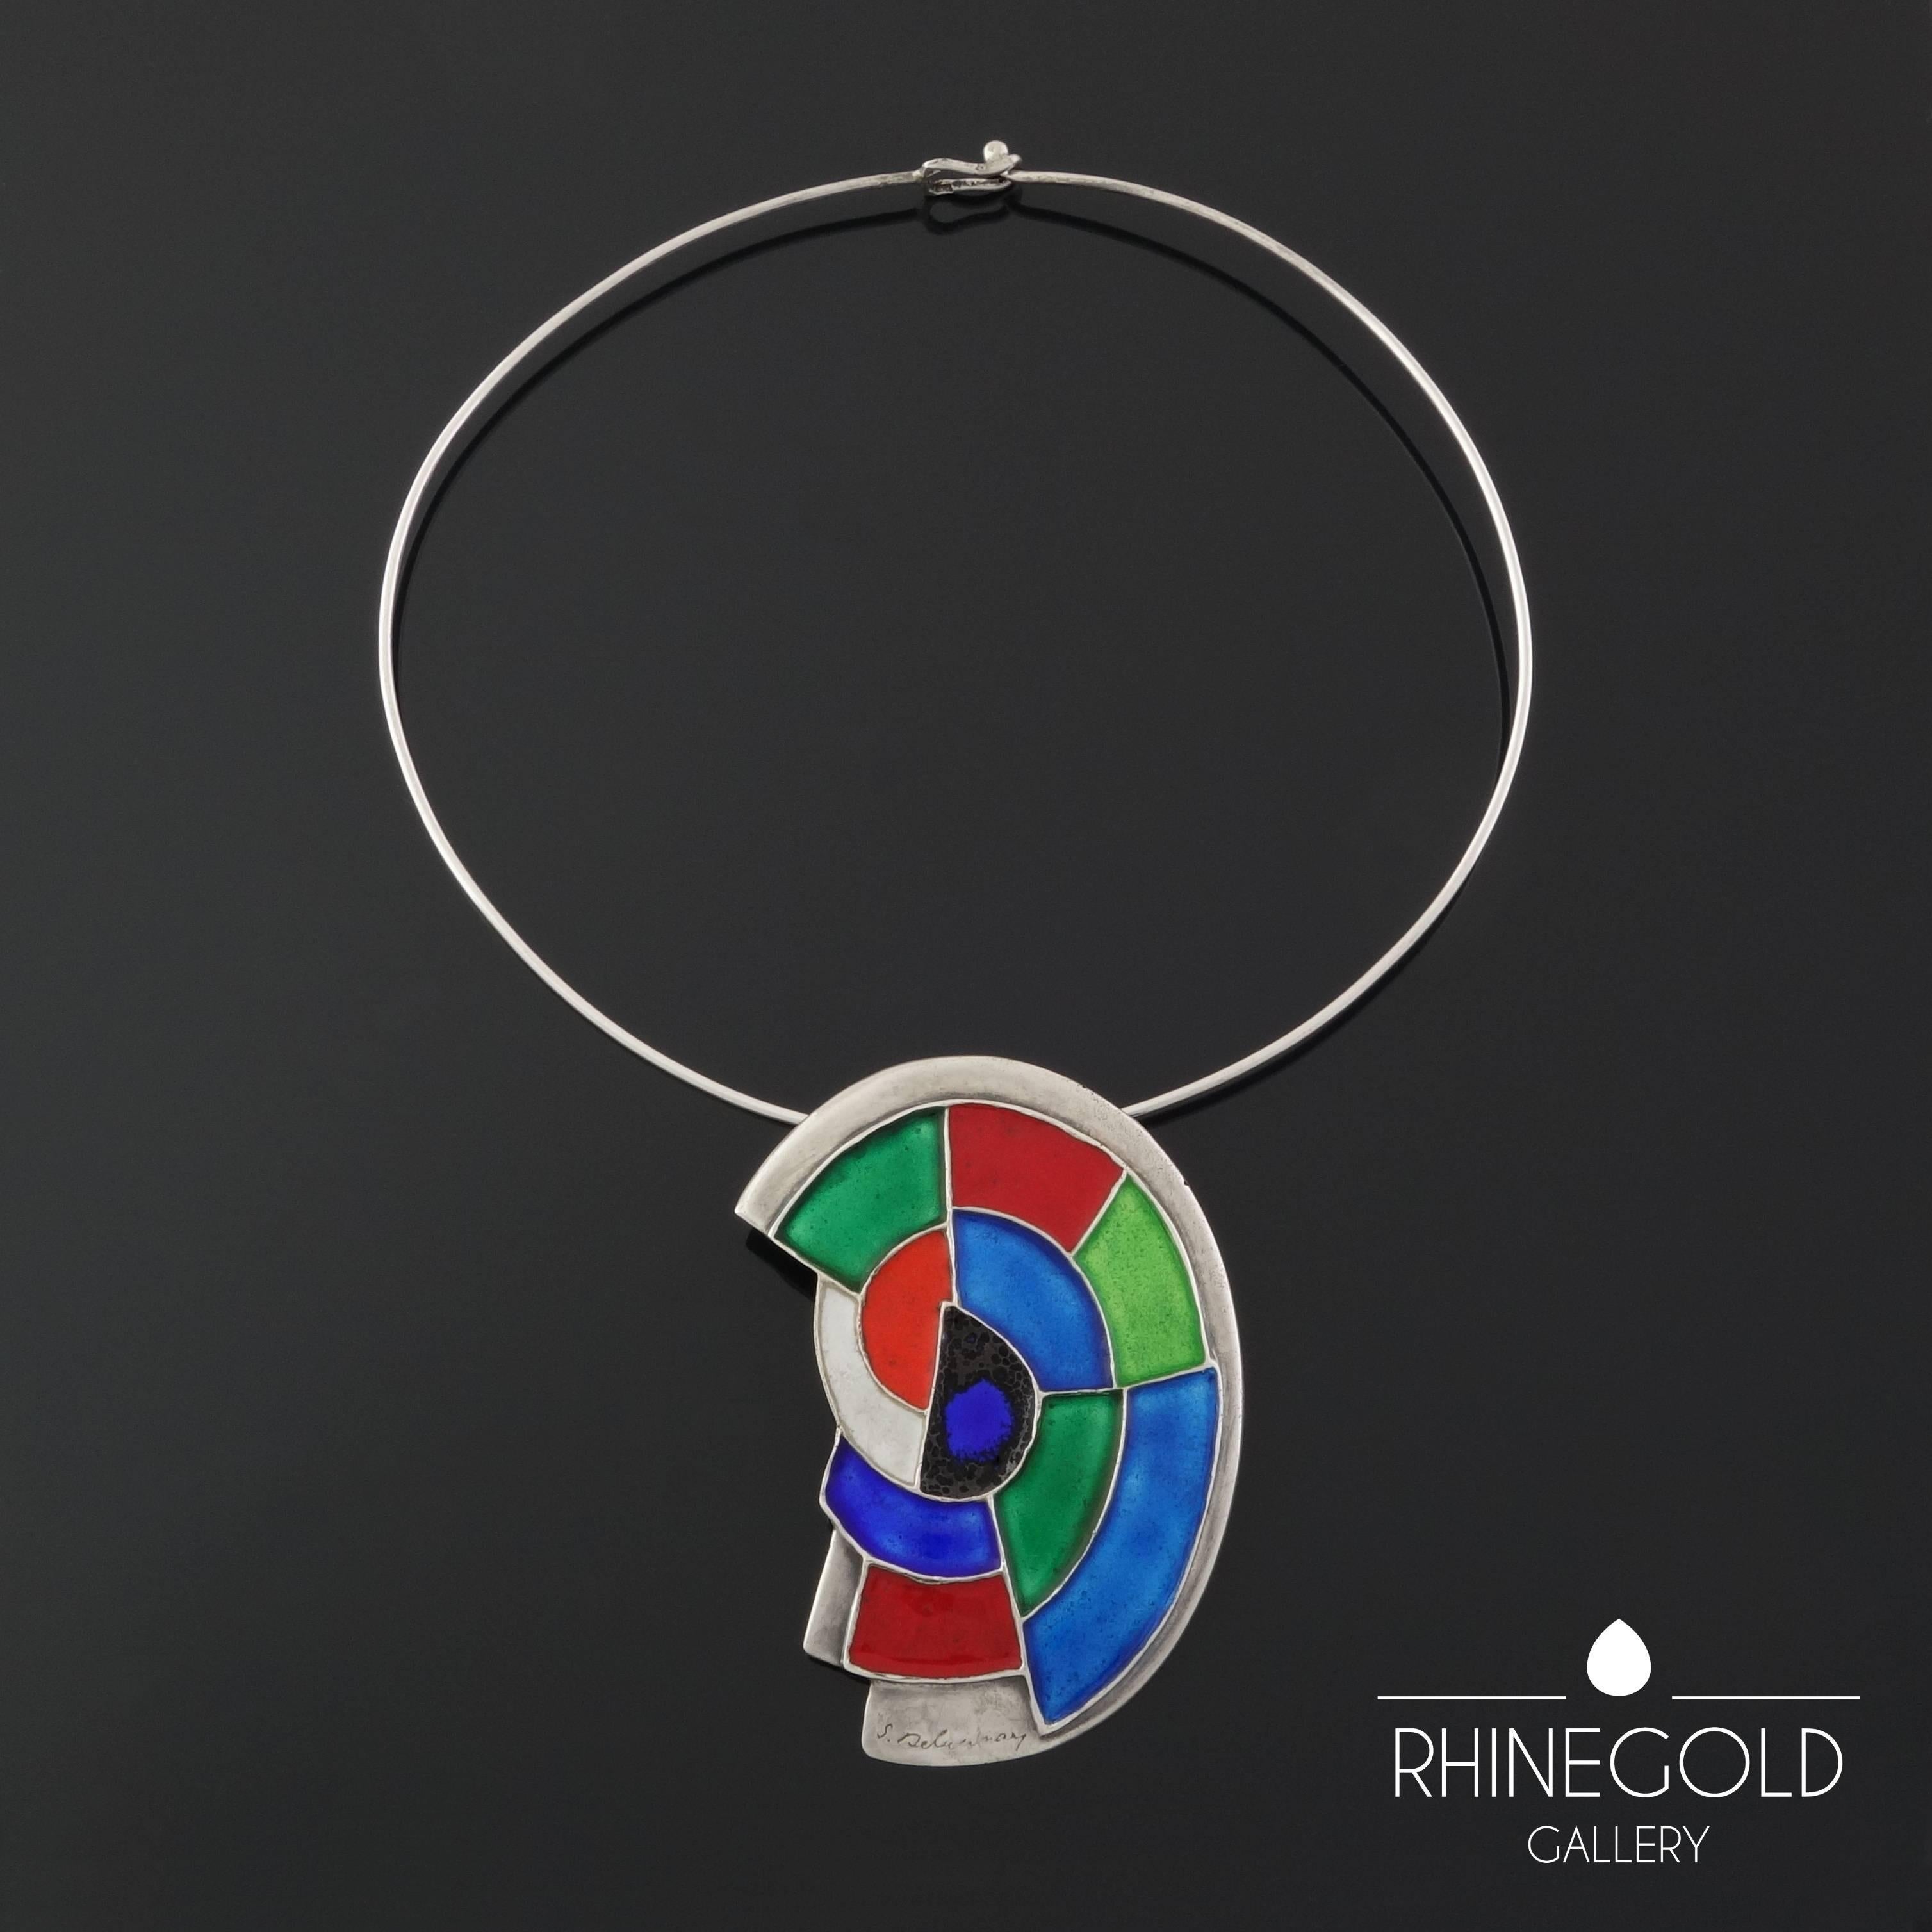 Authorized by Sonia Delaunay (1885 - 1979) in the last year of her life the pendant ‘Abstraction’ was edited by Artcurial, Paris, in a limited series of 350. 
The pendant is accompanied by its original box, its original certificate stating it to be